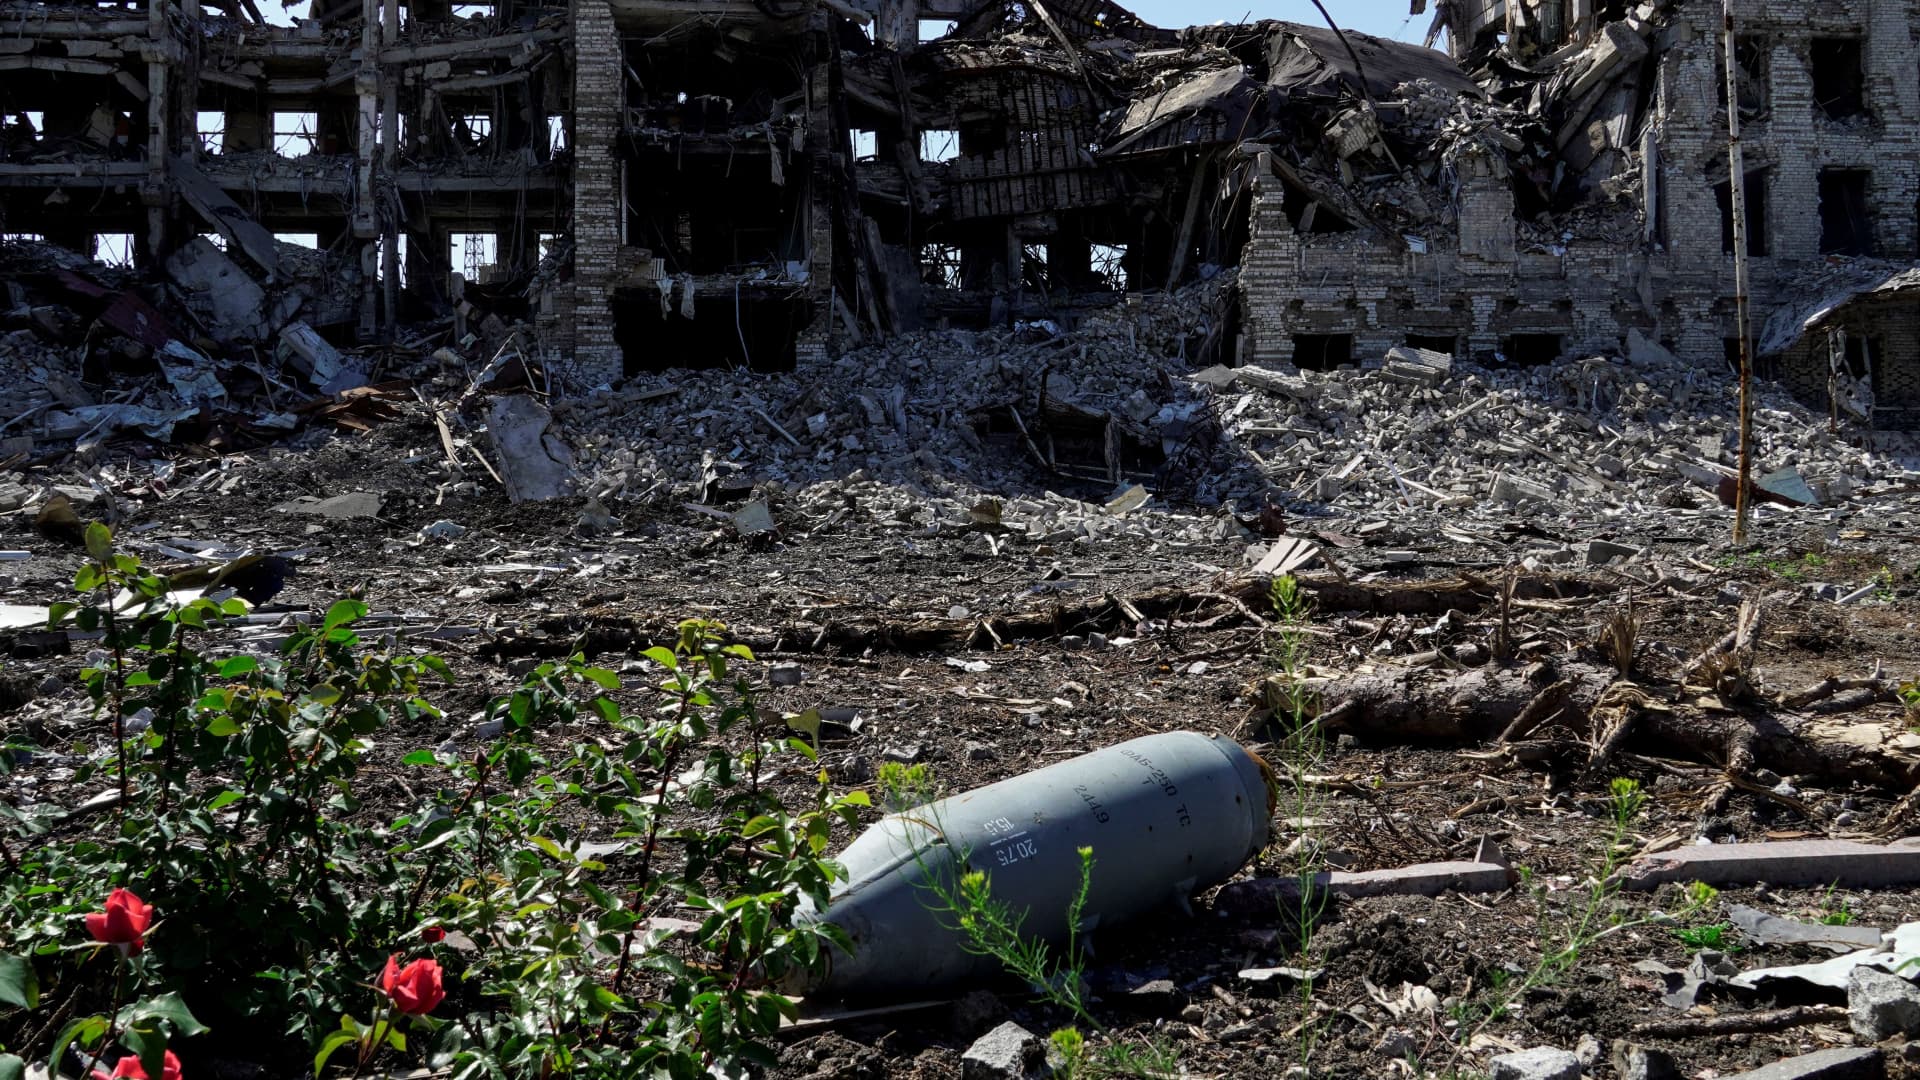 A non exploded aviation bomb FAB-250 is pictured in front of a destroyed building in the city of Mariupol on June 2, 2022, amid the ongoing Russian military action in Ukraine.